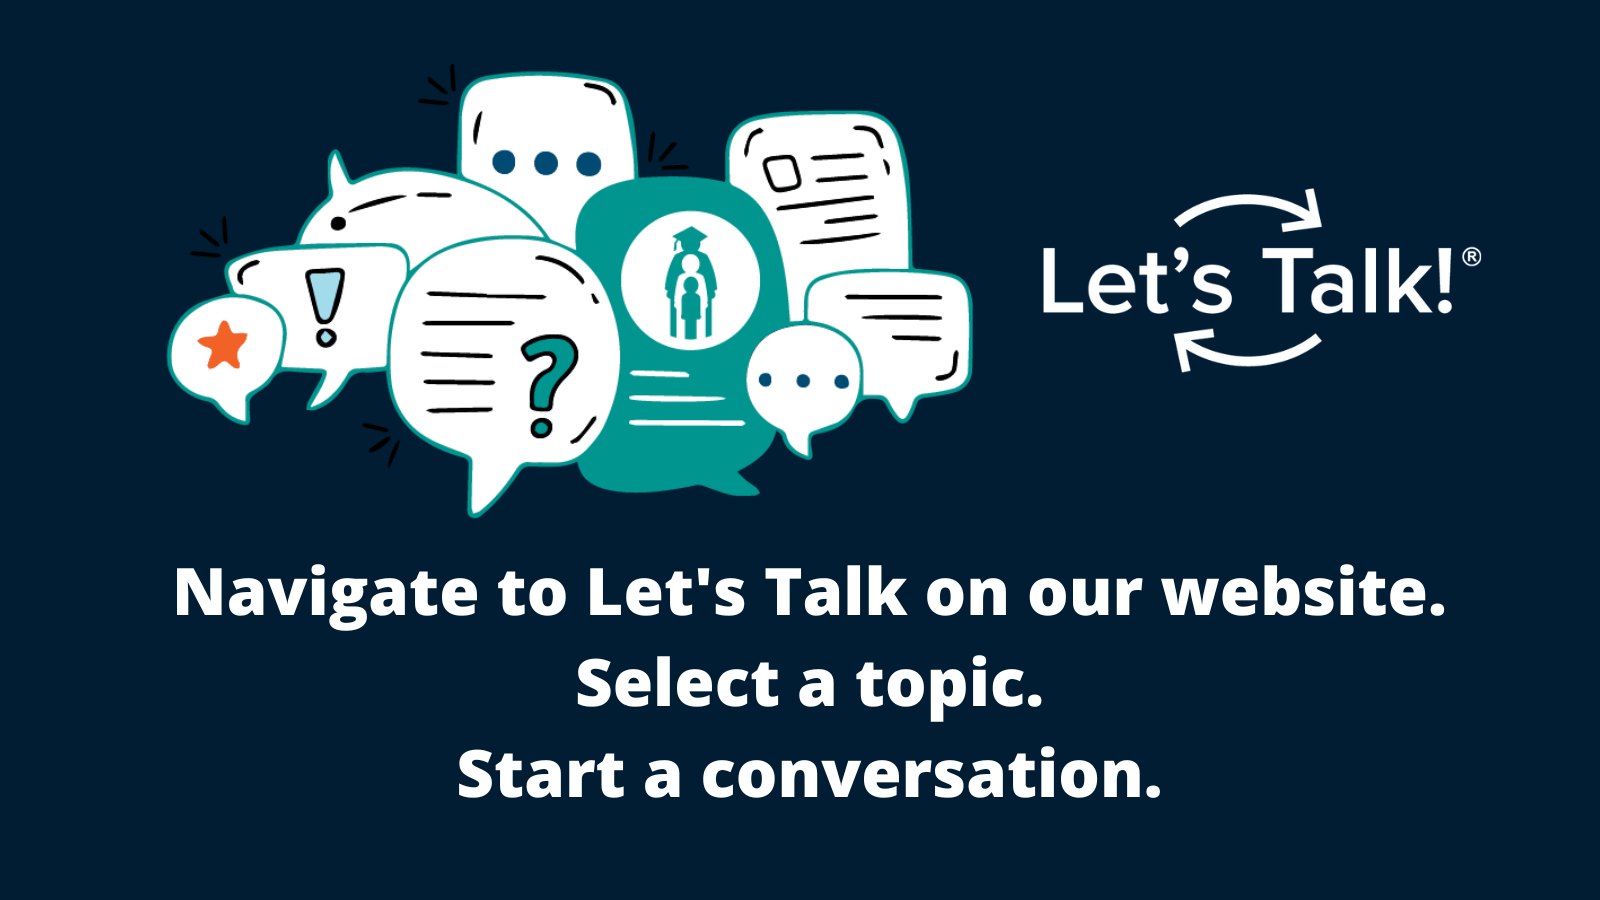 A collage of various speech bubbles appears above text that reads, "Navigate to Let's Talk on our website. Select a topic. Start a conversation. Let's Talk." Image sized for Twitter.